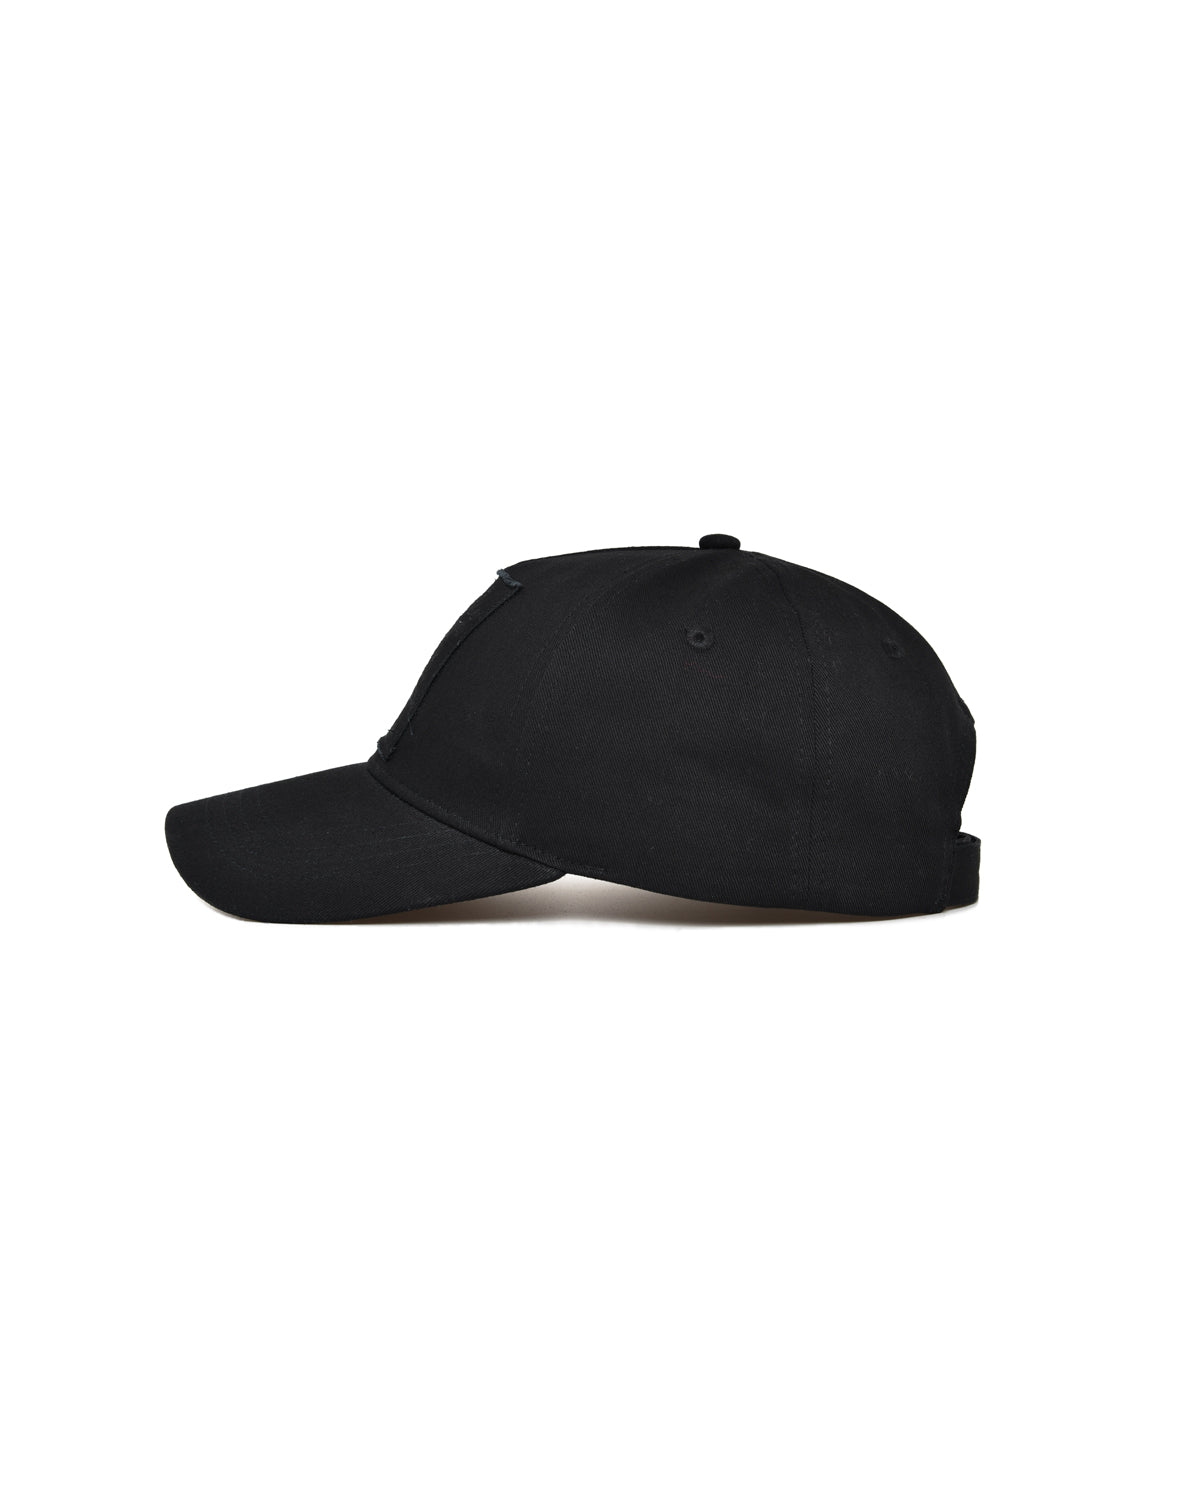 Black 100% Cotton Baseball Cap With Embroidered Vanlife Label